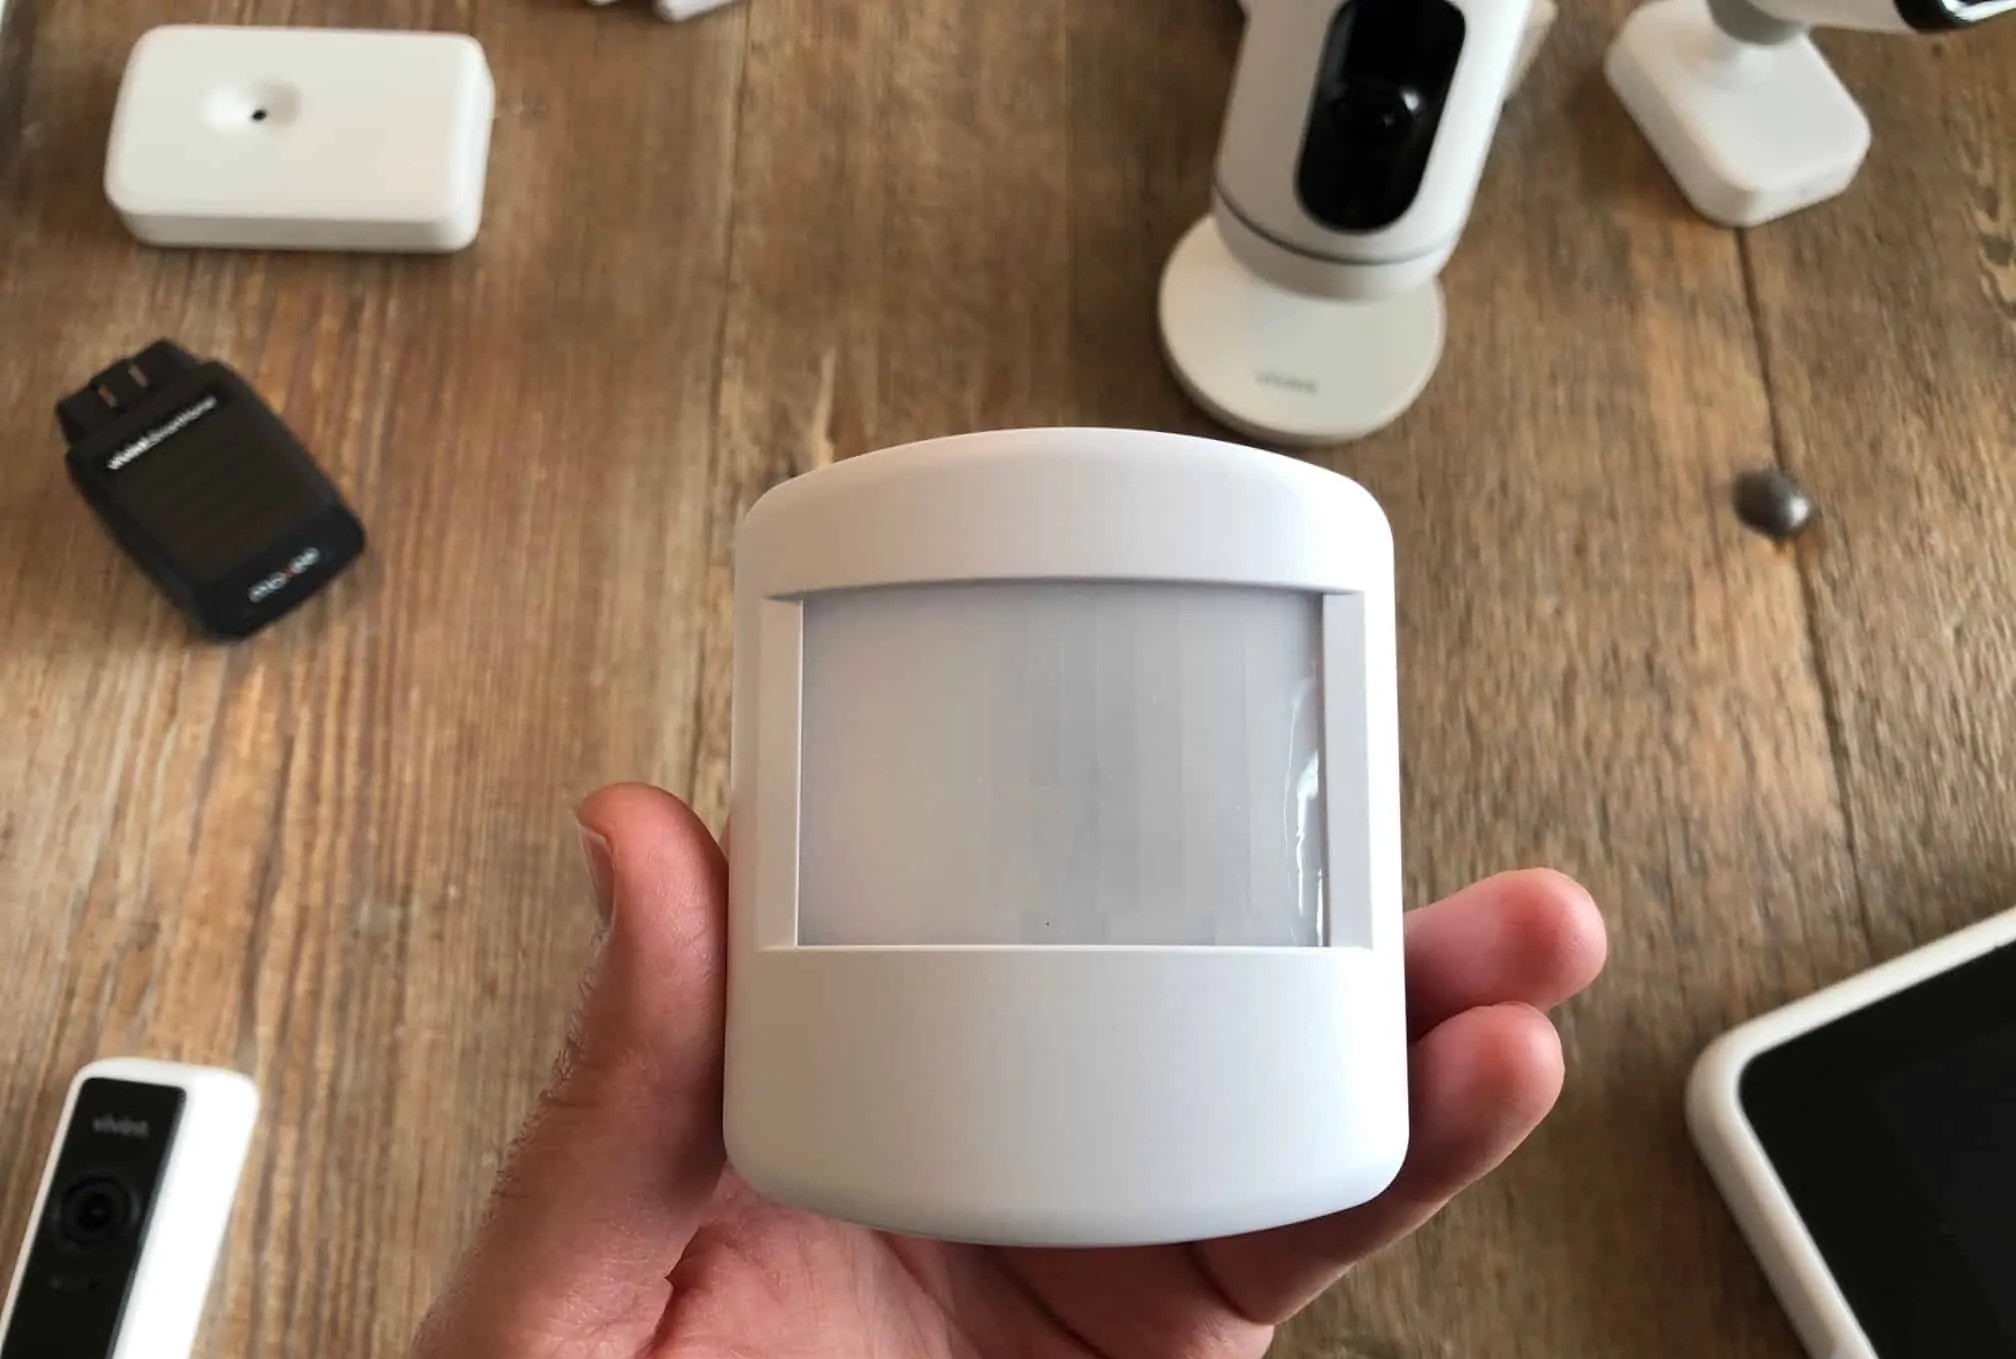 How To Change The Battery On A Vivint Motion Detector